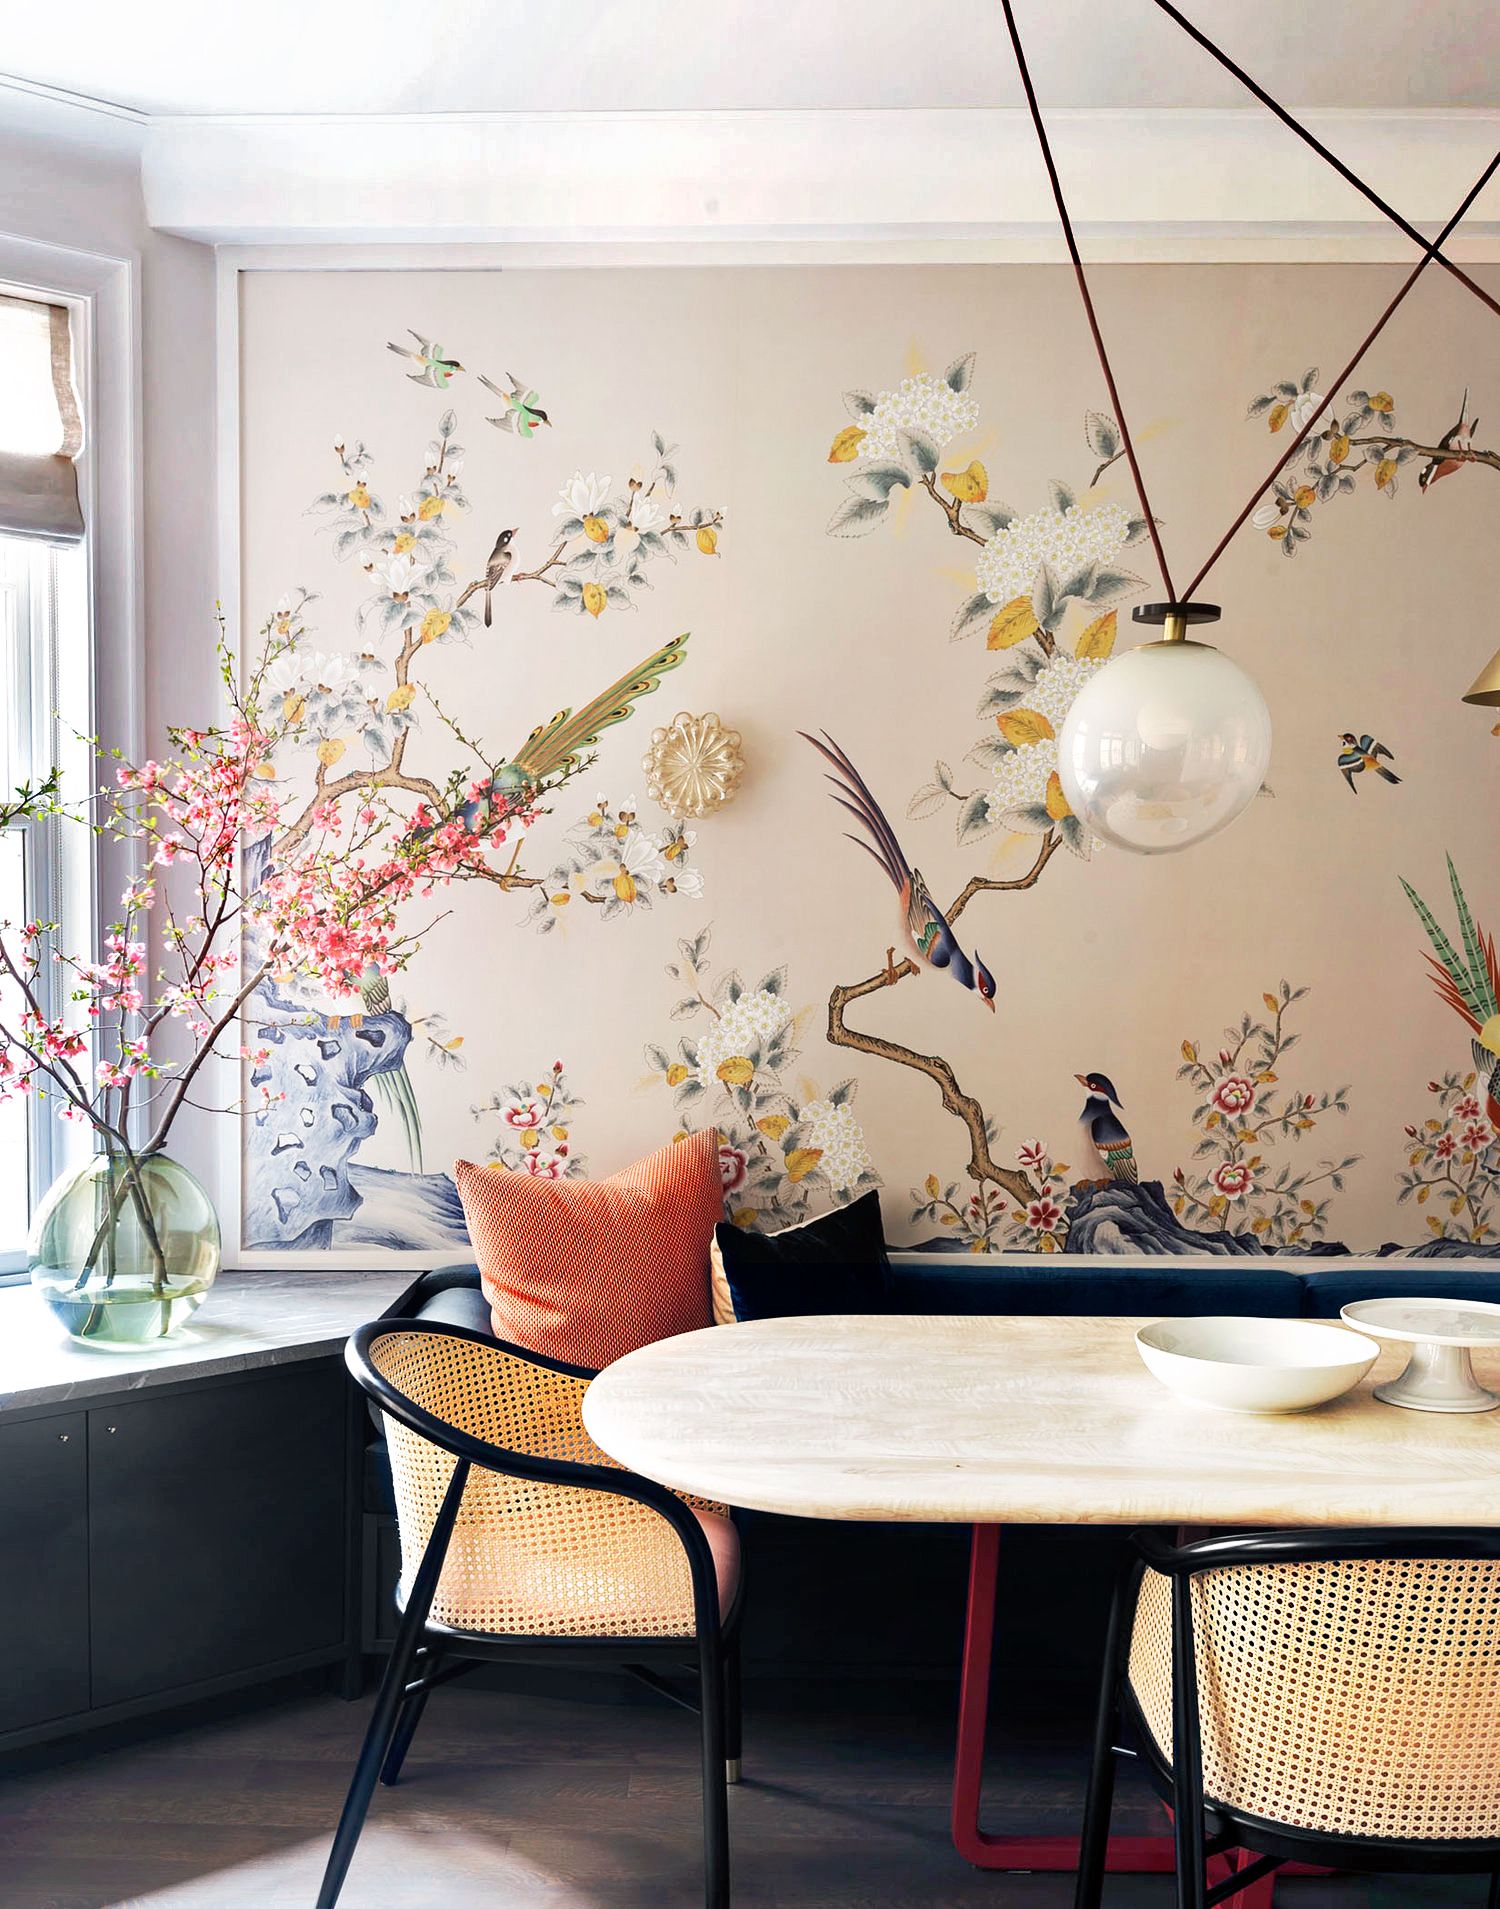 Beyond Walls: Creative Wallpaper Uses to Try at Home – CommonRoom